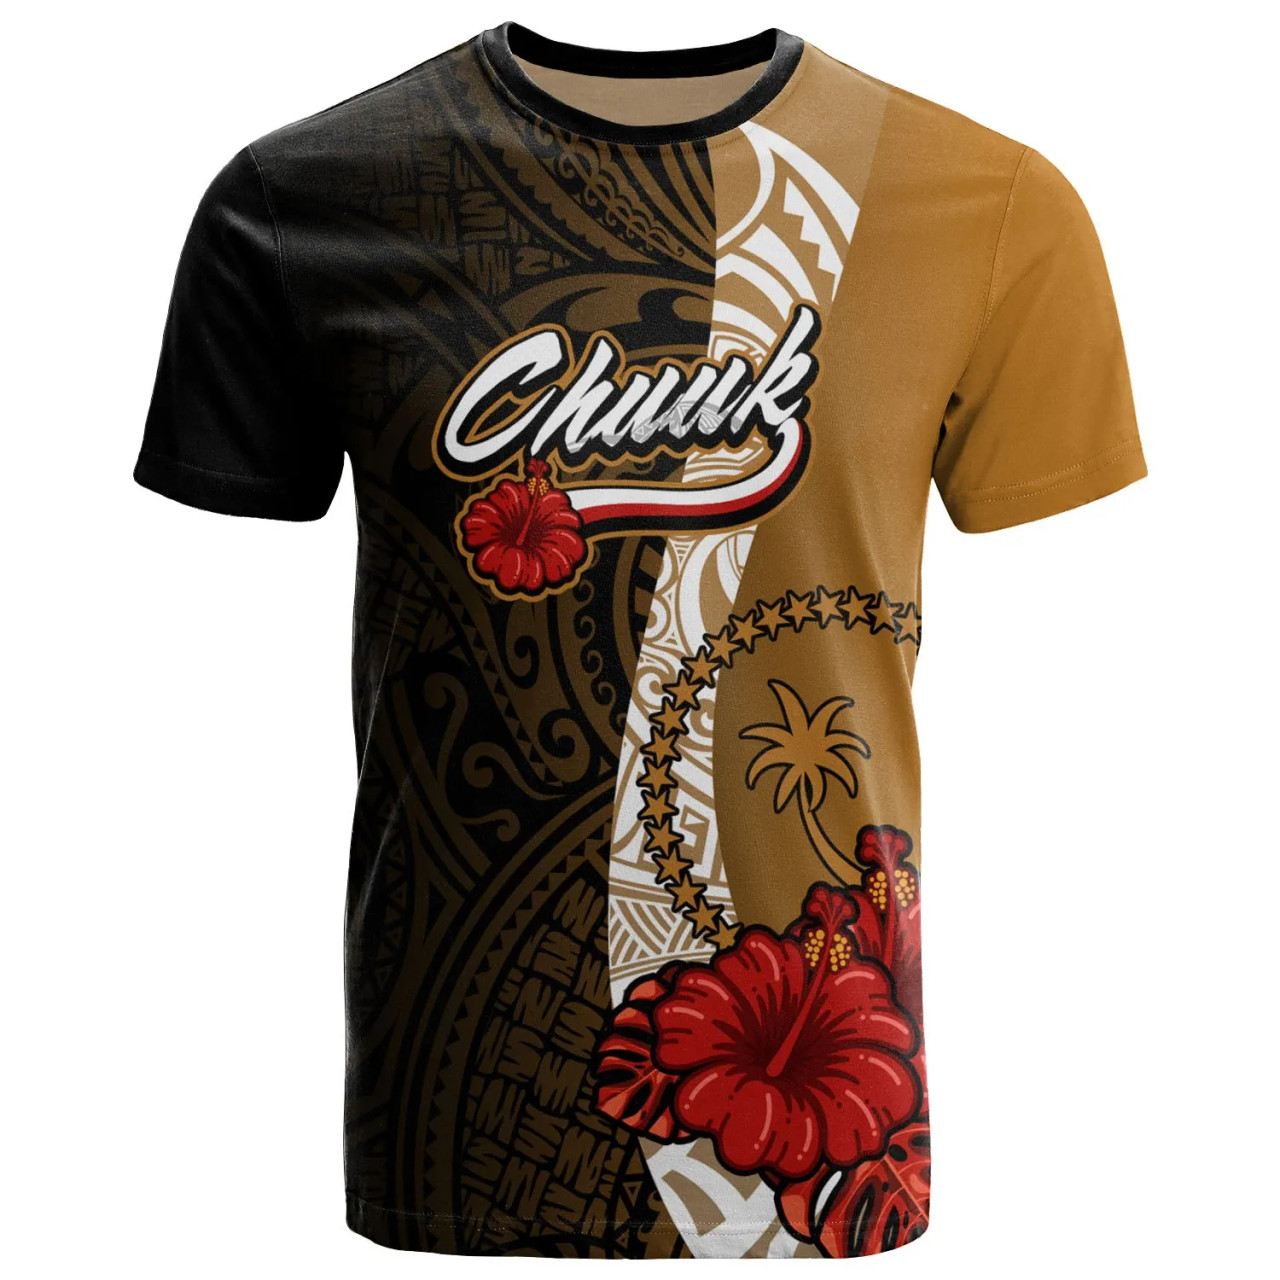 Chuuk Micronesia T-Shirt - Coat Of Arms With Hibiscus Gold 1